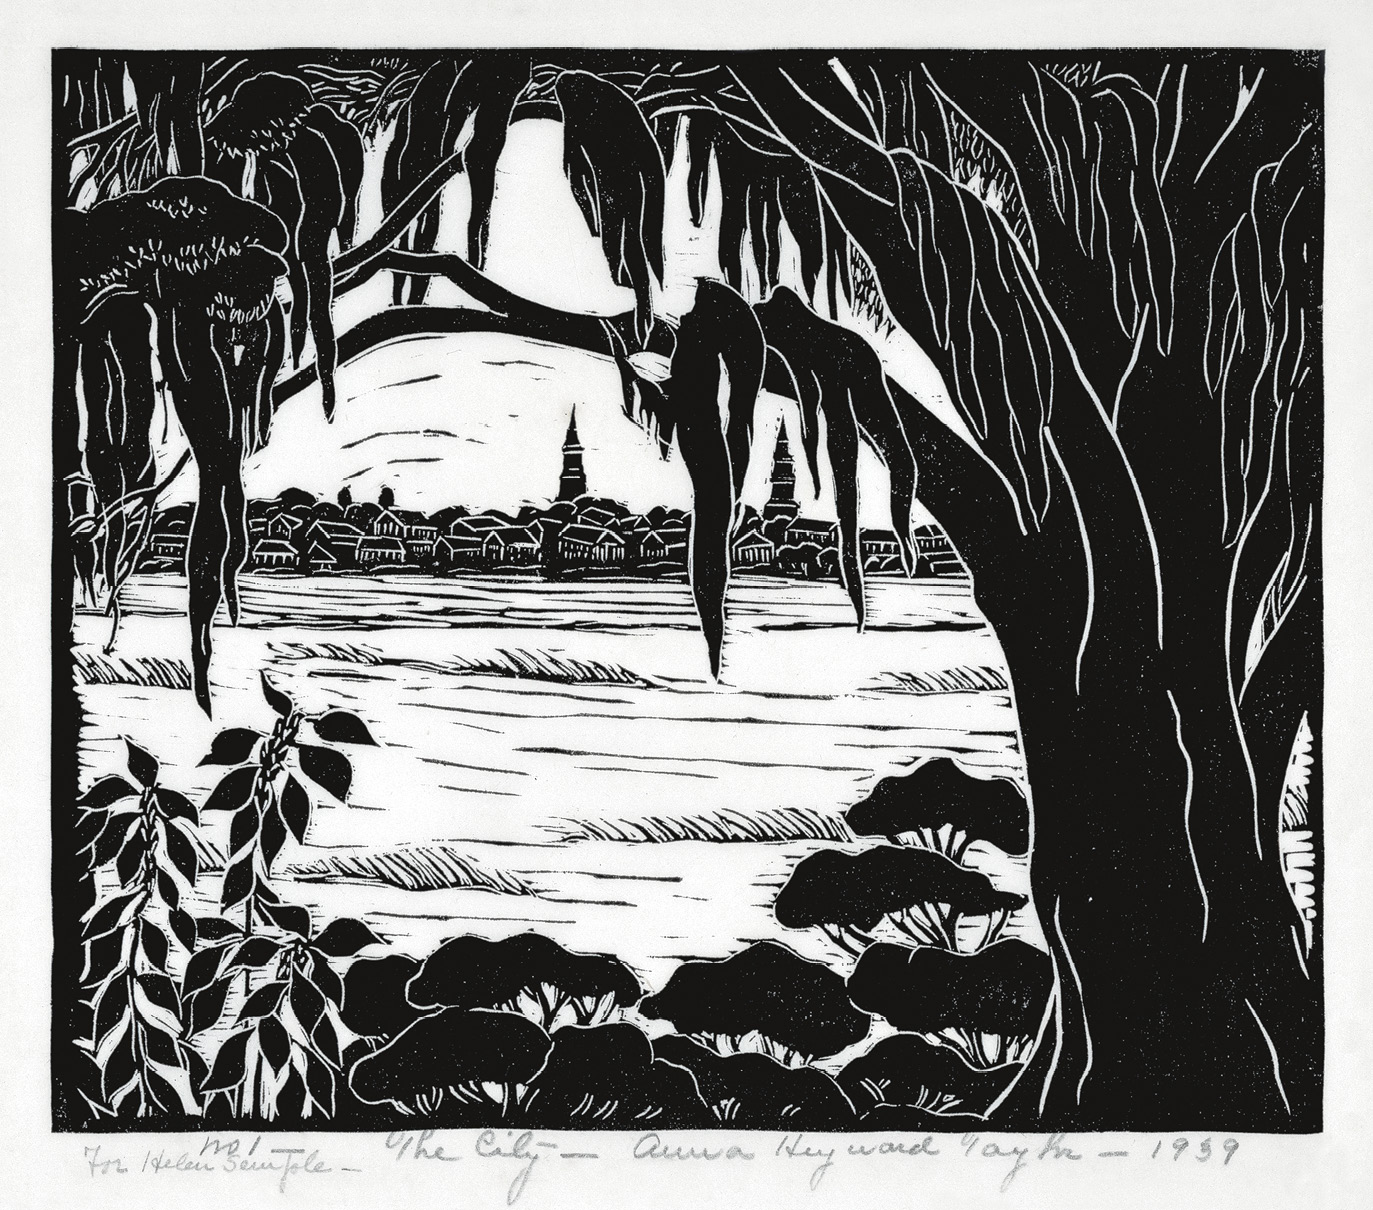 Taylor moved to Charleston in 1927 and produced numerous signature works of the region, including this woodblock print, The City, in 1939.